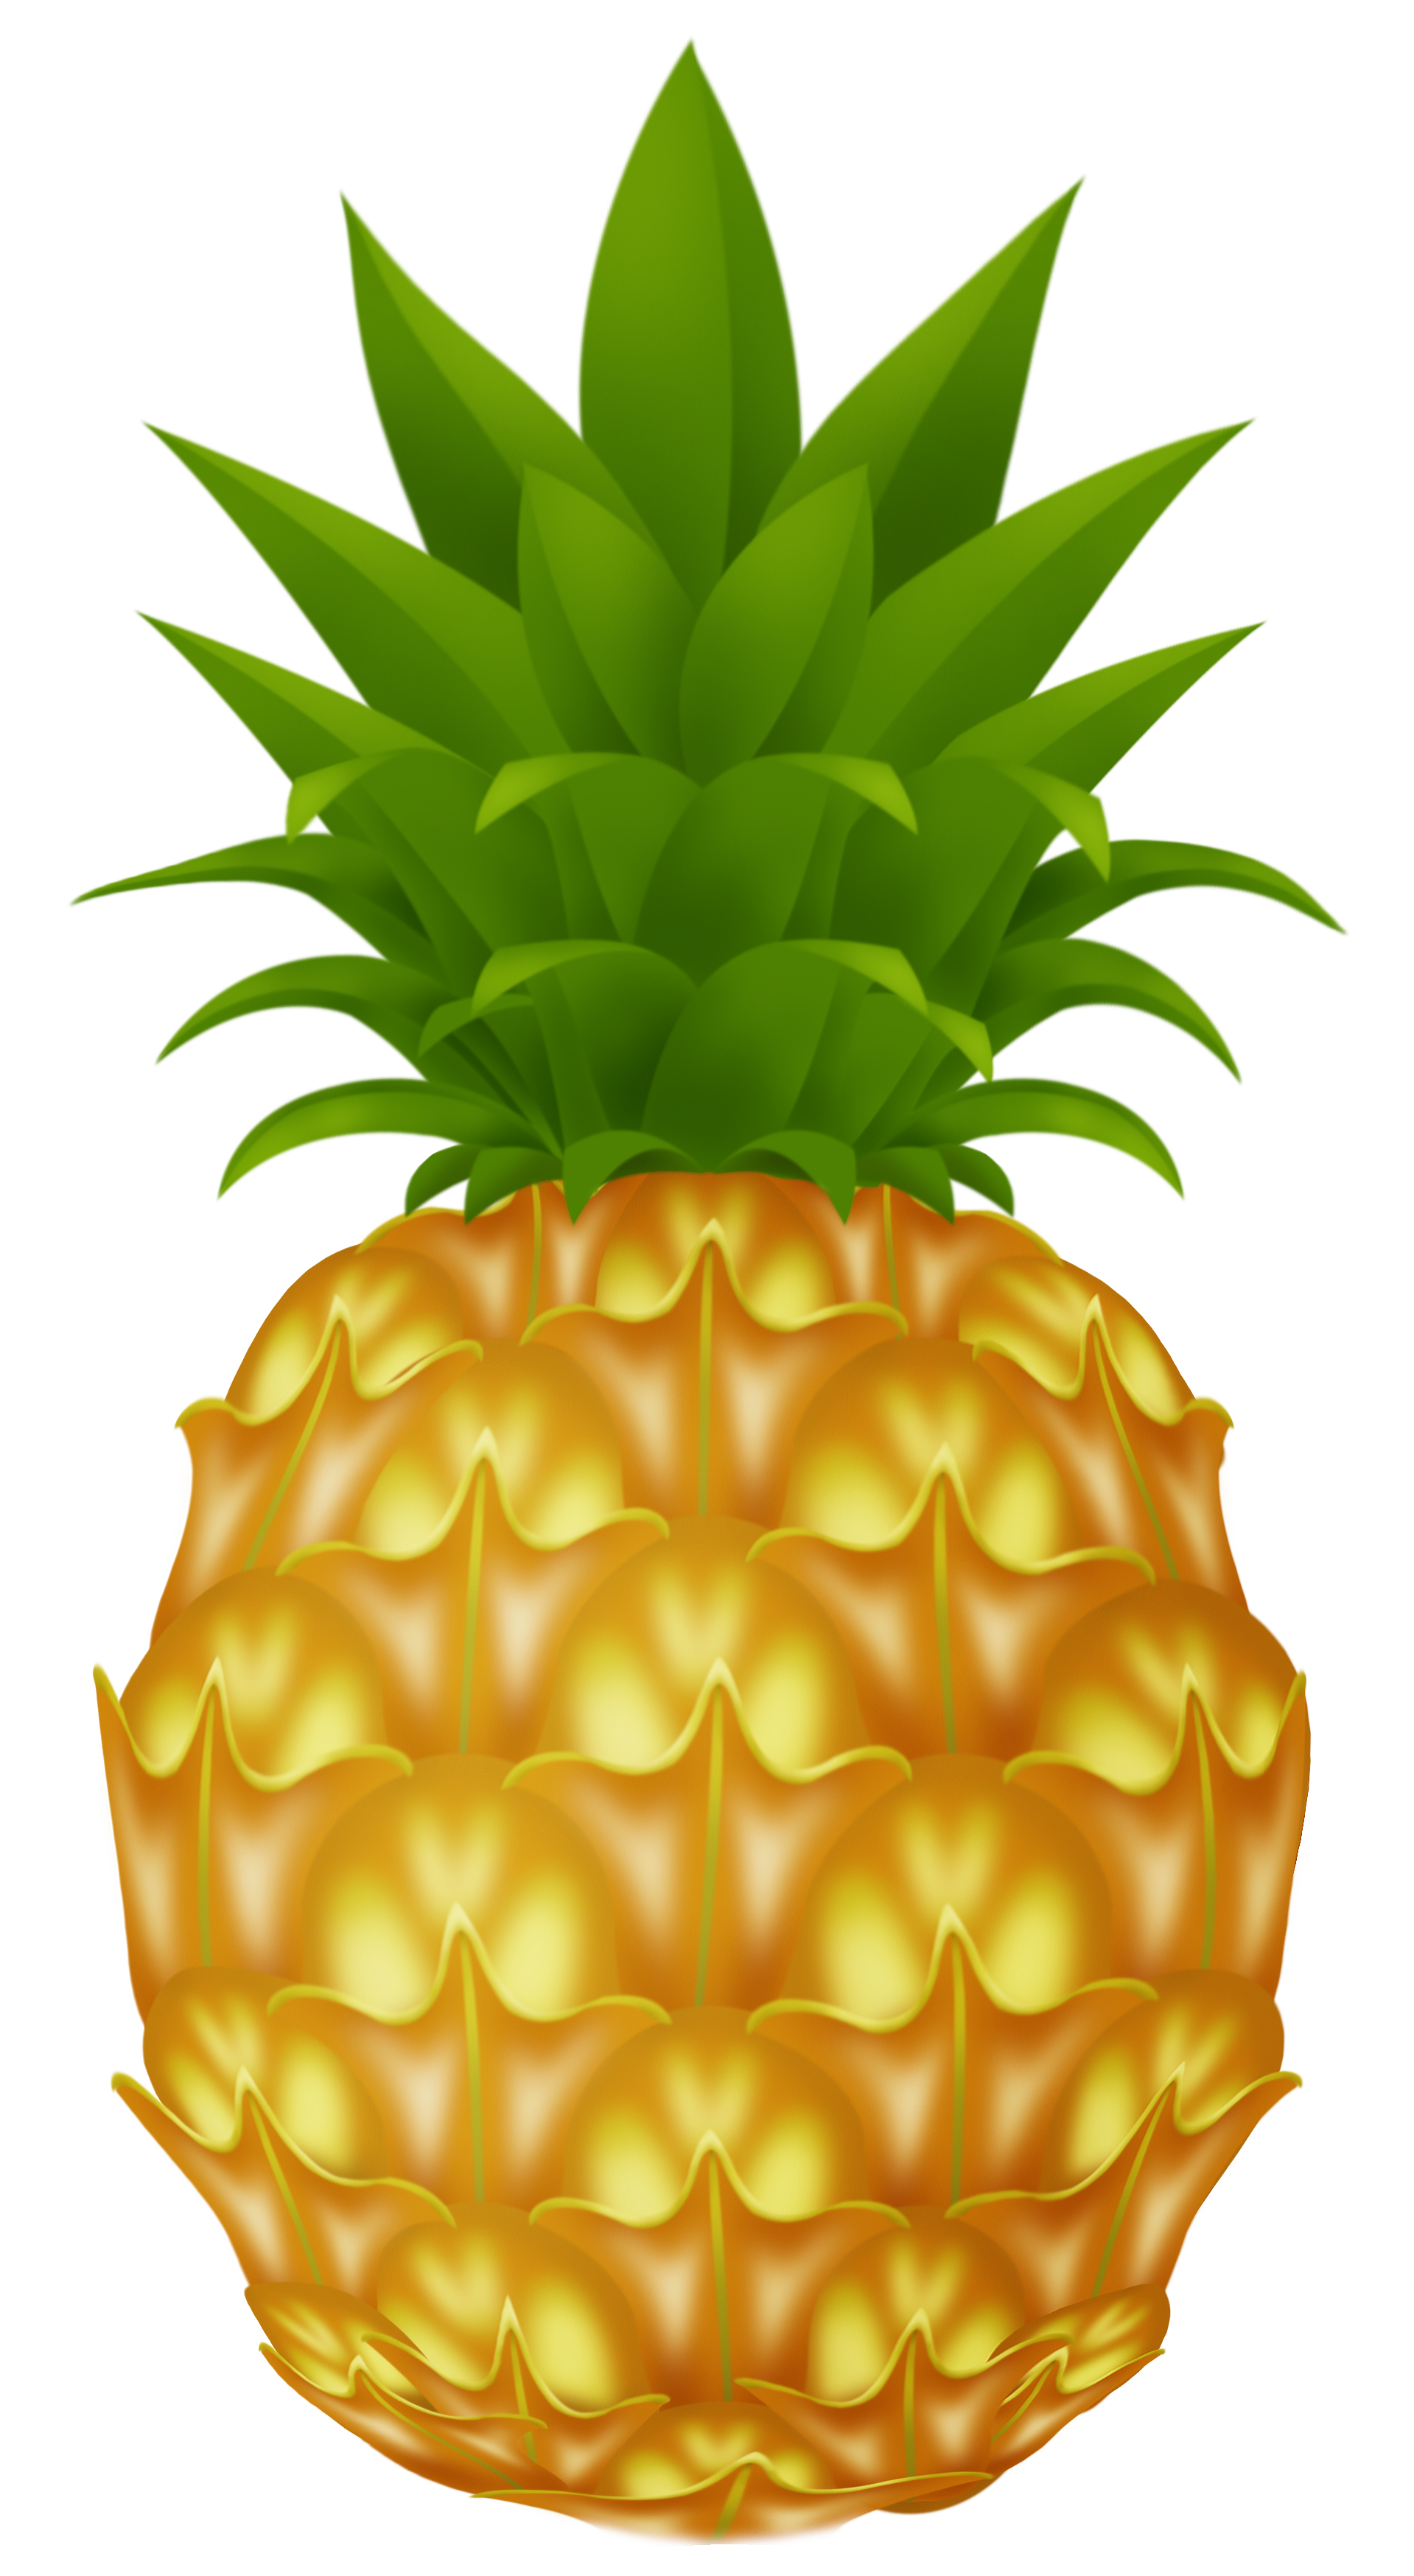 Pineapple images free pictures download clipart